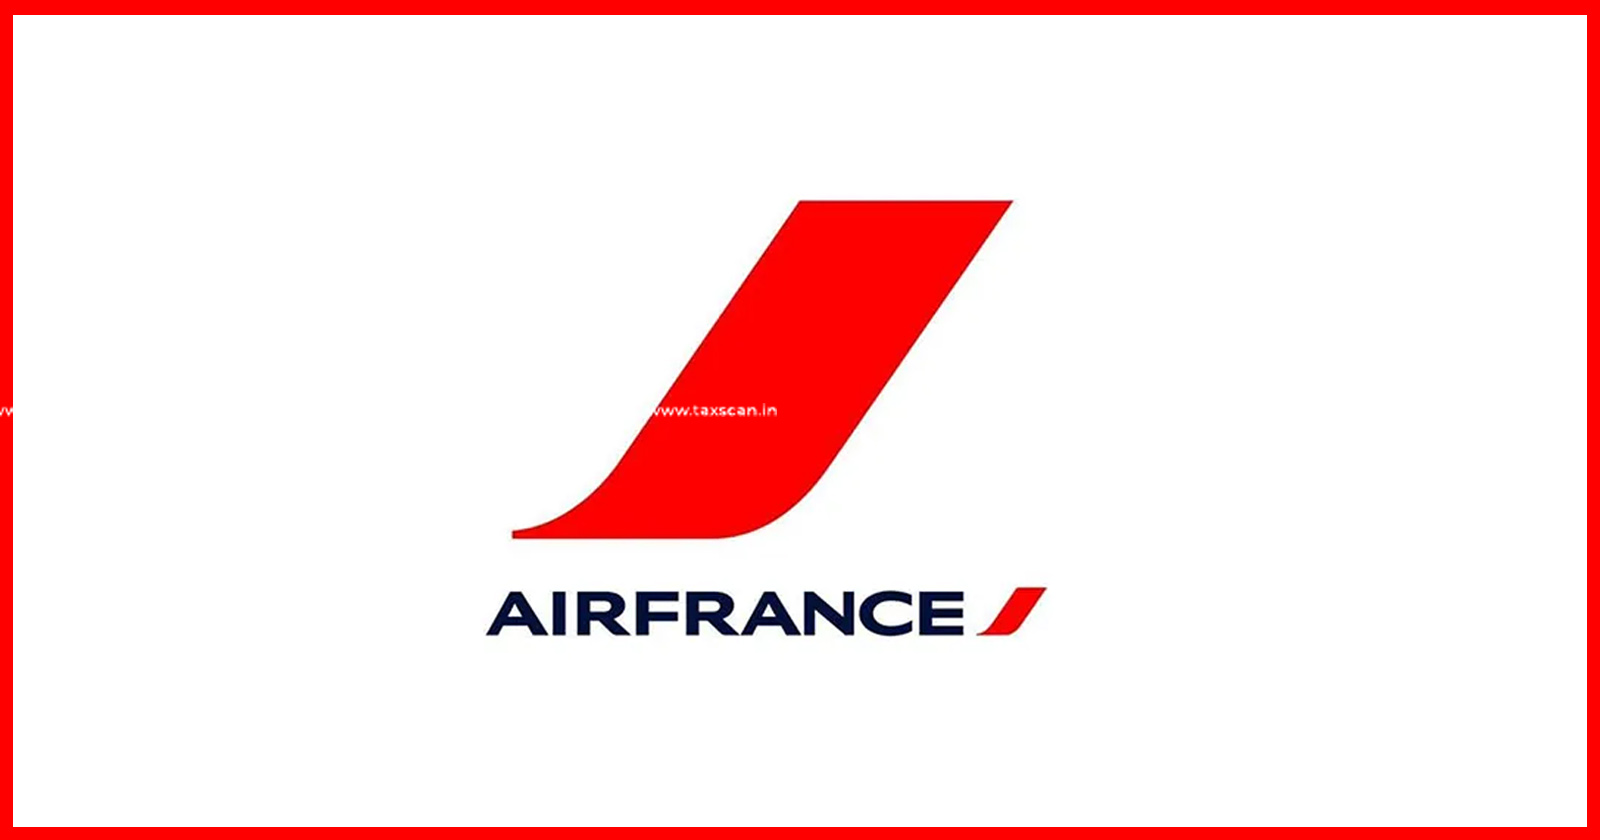 Relief to Air France - Air France - CESTAT Quashes Service Tax Demand - CESTAT - Service Tax Demand - Service Tax - Demand - Collection of Excess Baggage Charges - Excess Baggage Charges - Baggage Charges - Taxscan